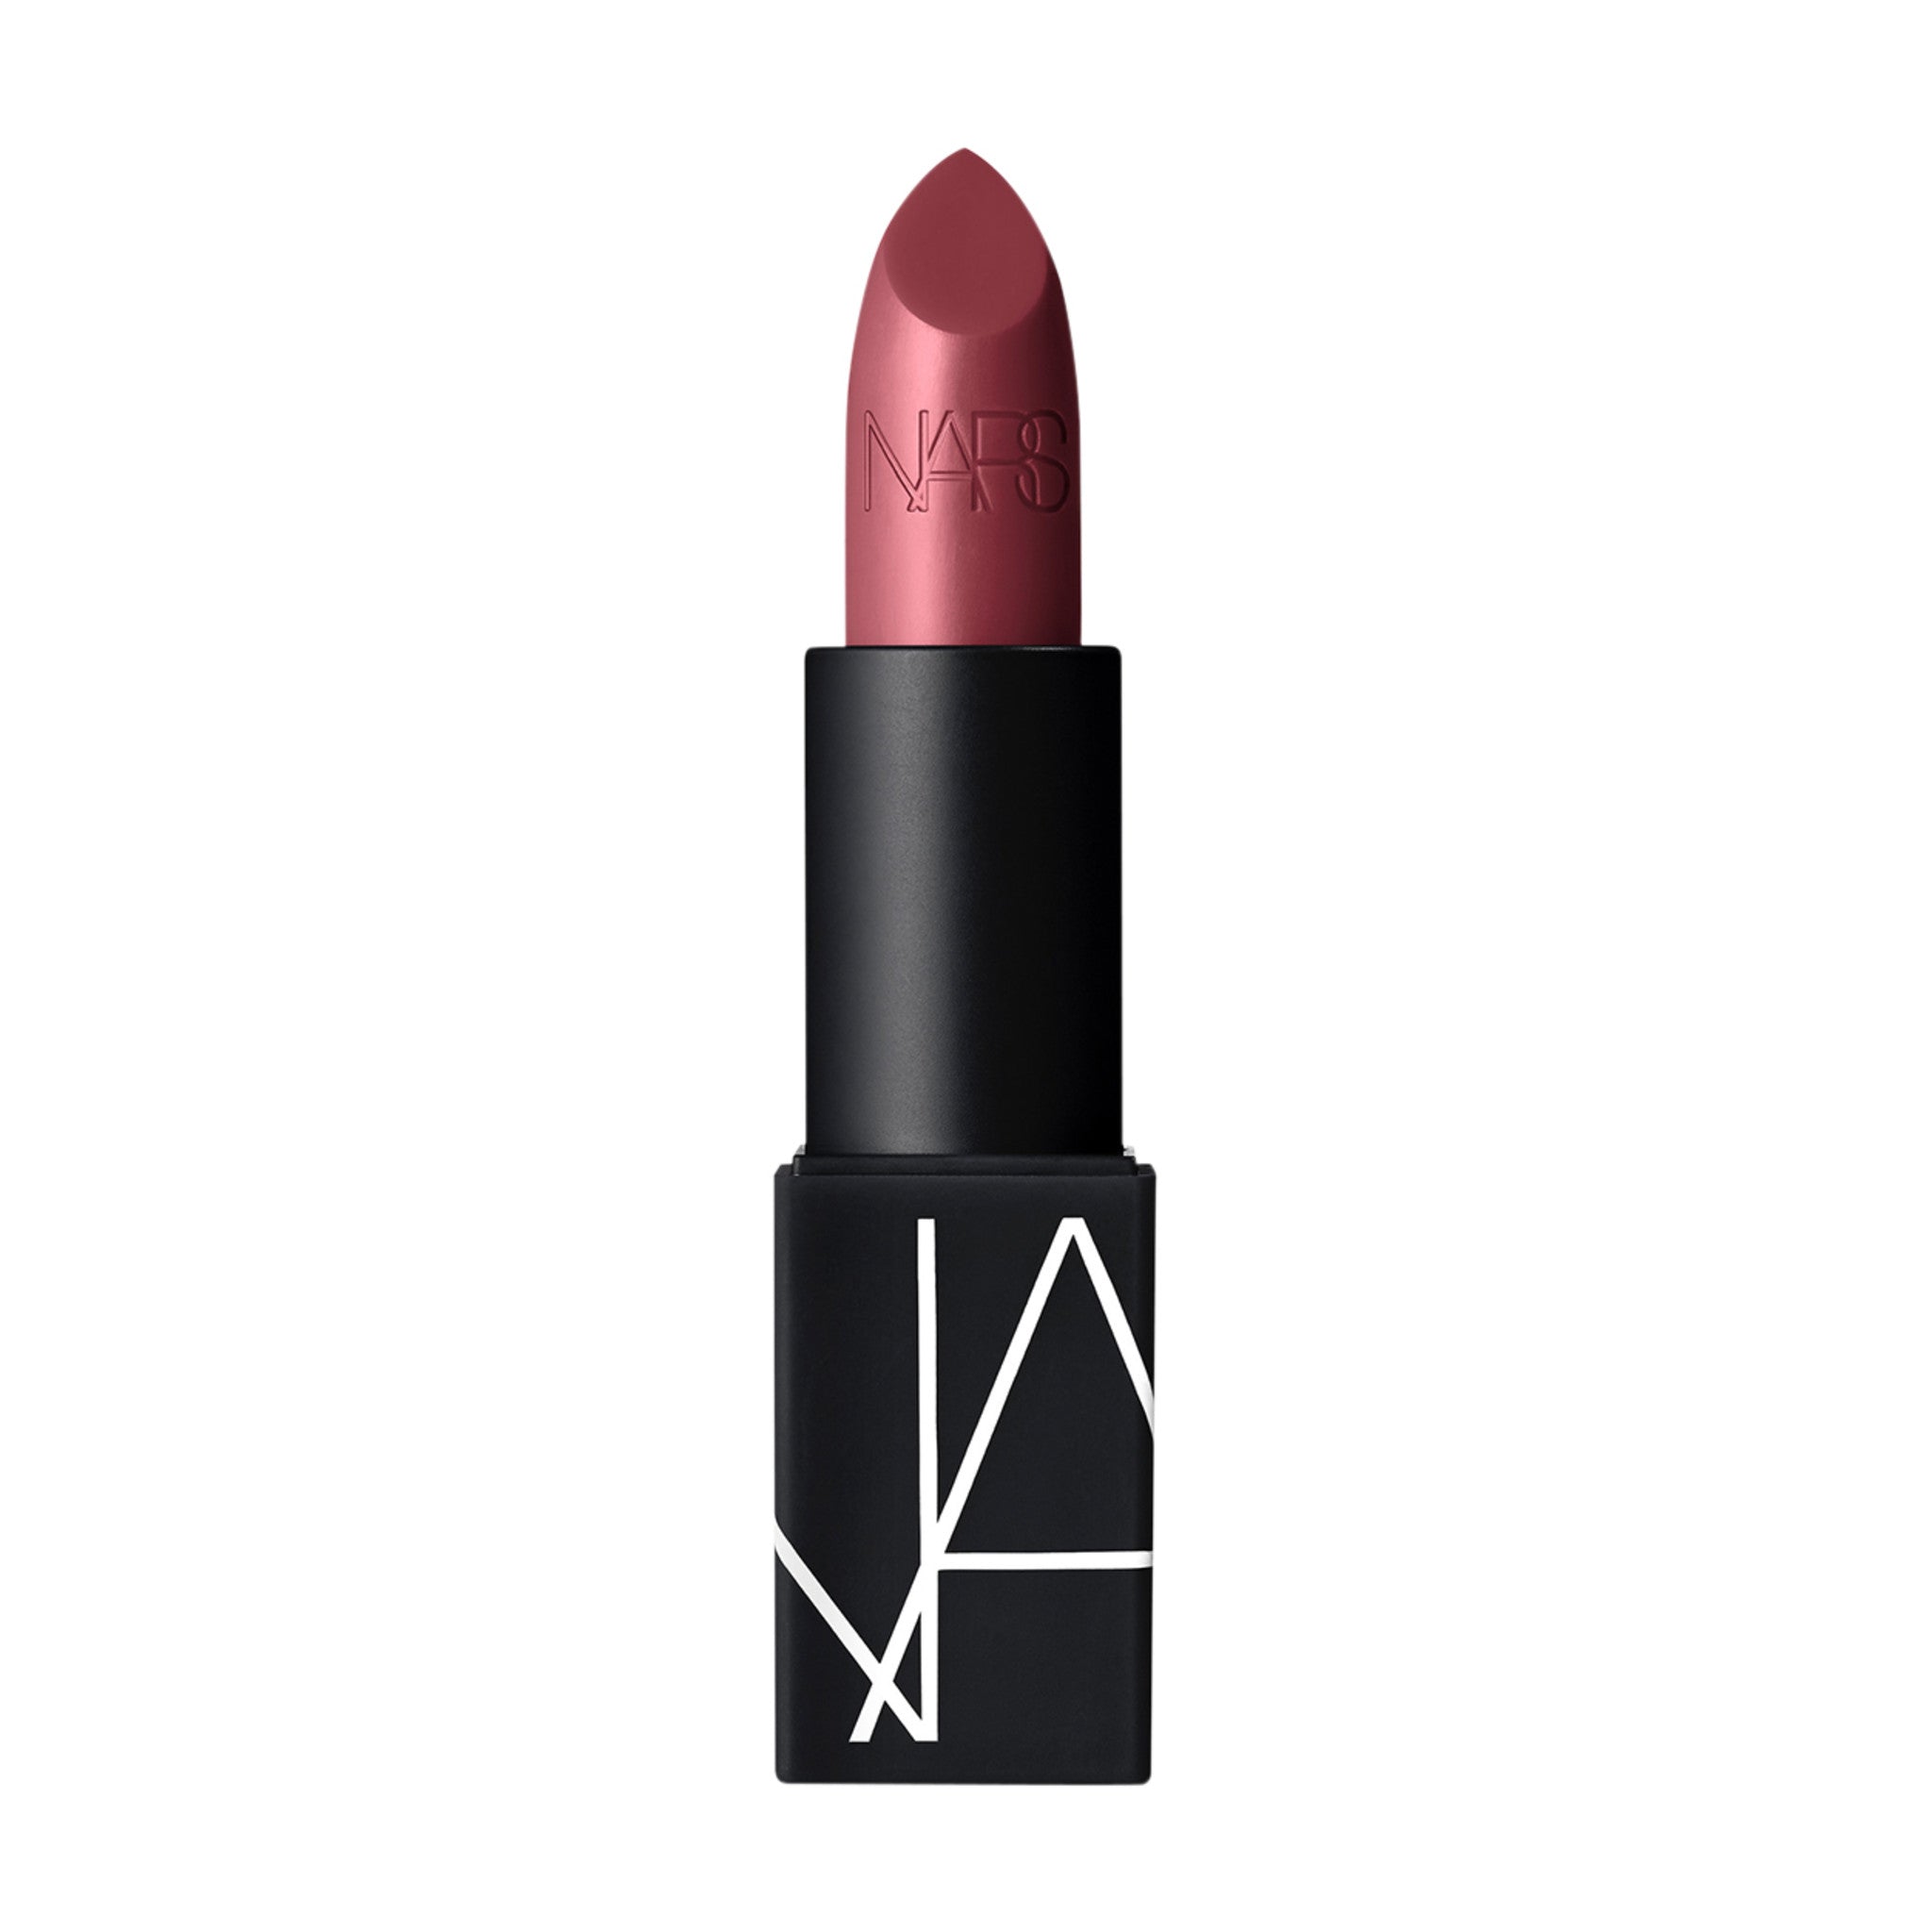 Nars Lipstick Color/Shade variant: Afghan Red (Satin) main image. This product is in the color red